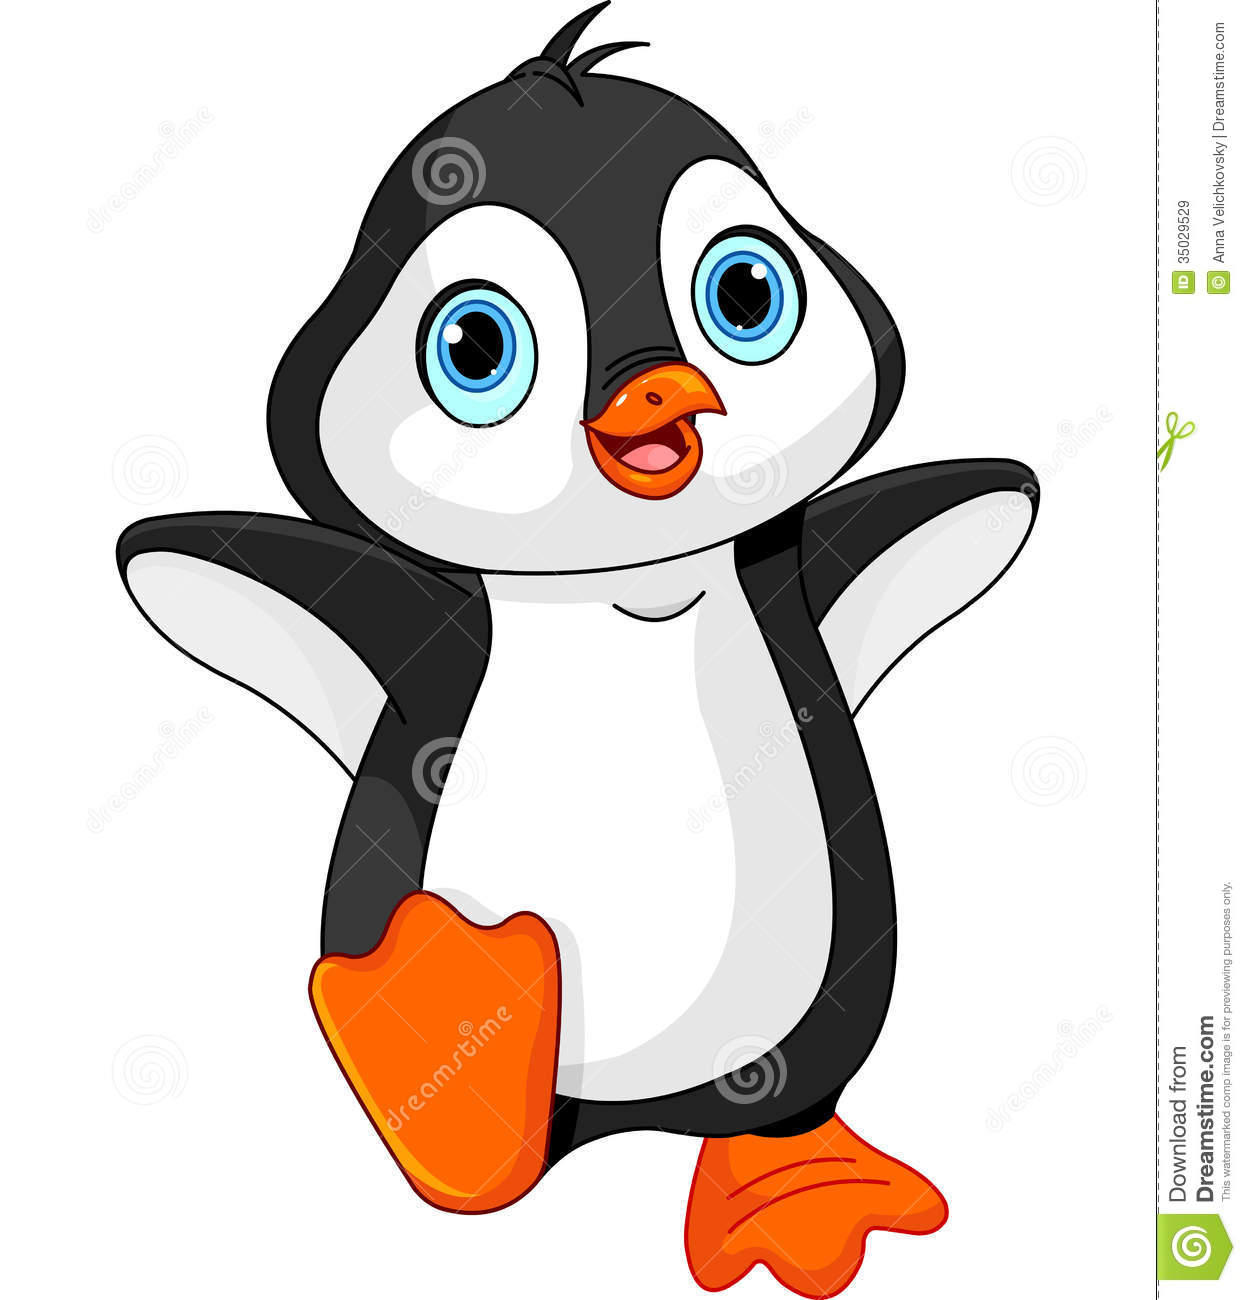 Cartoon Baby Penguin Royalty Free Stock Images   Image  35029529